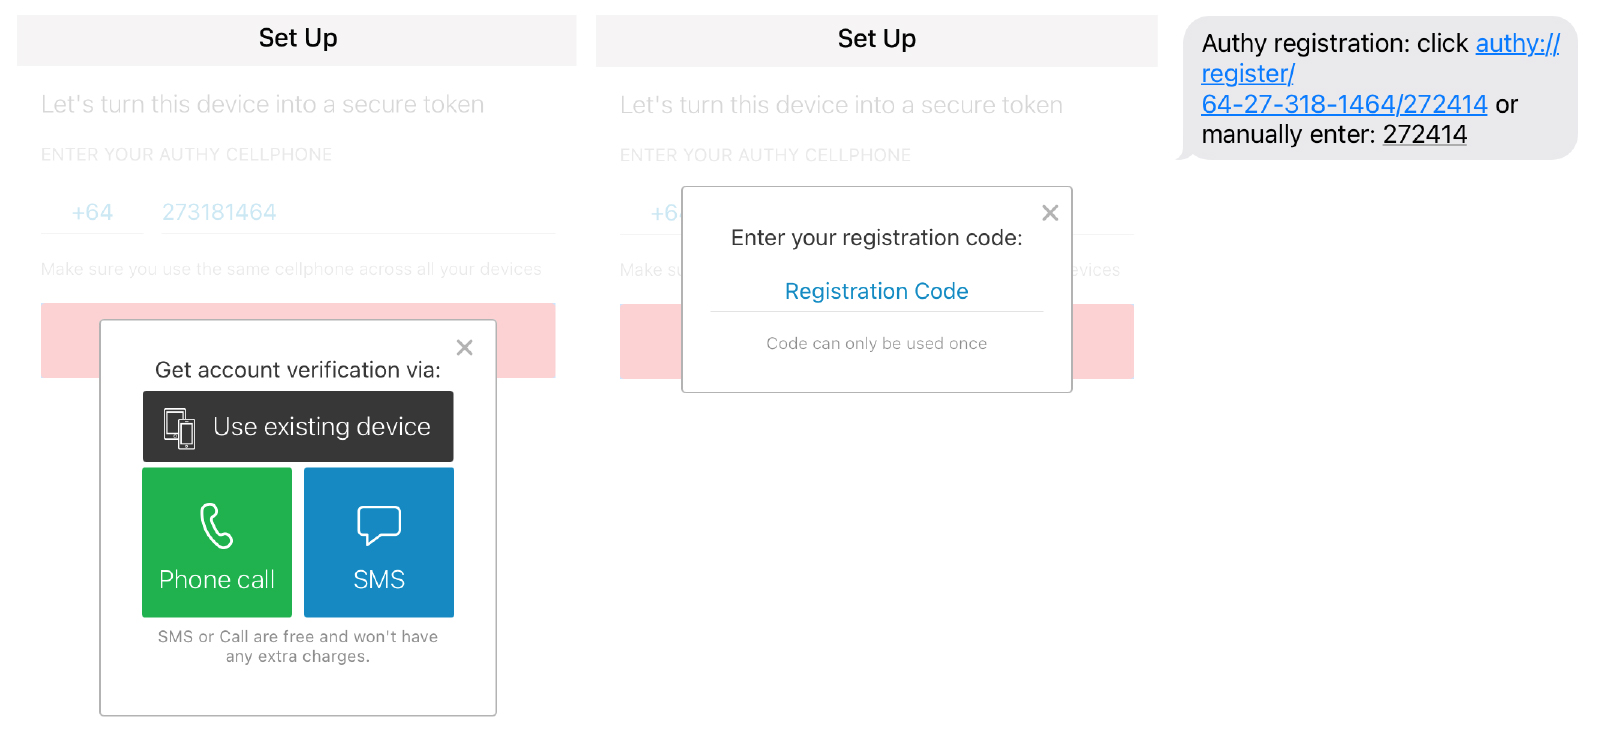 Next authentication app setup step for verification through phone call or SMS, alongside the next step of entering the registration code. To the right is an example text message with a registration link and six-digit code. 